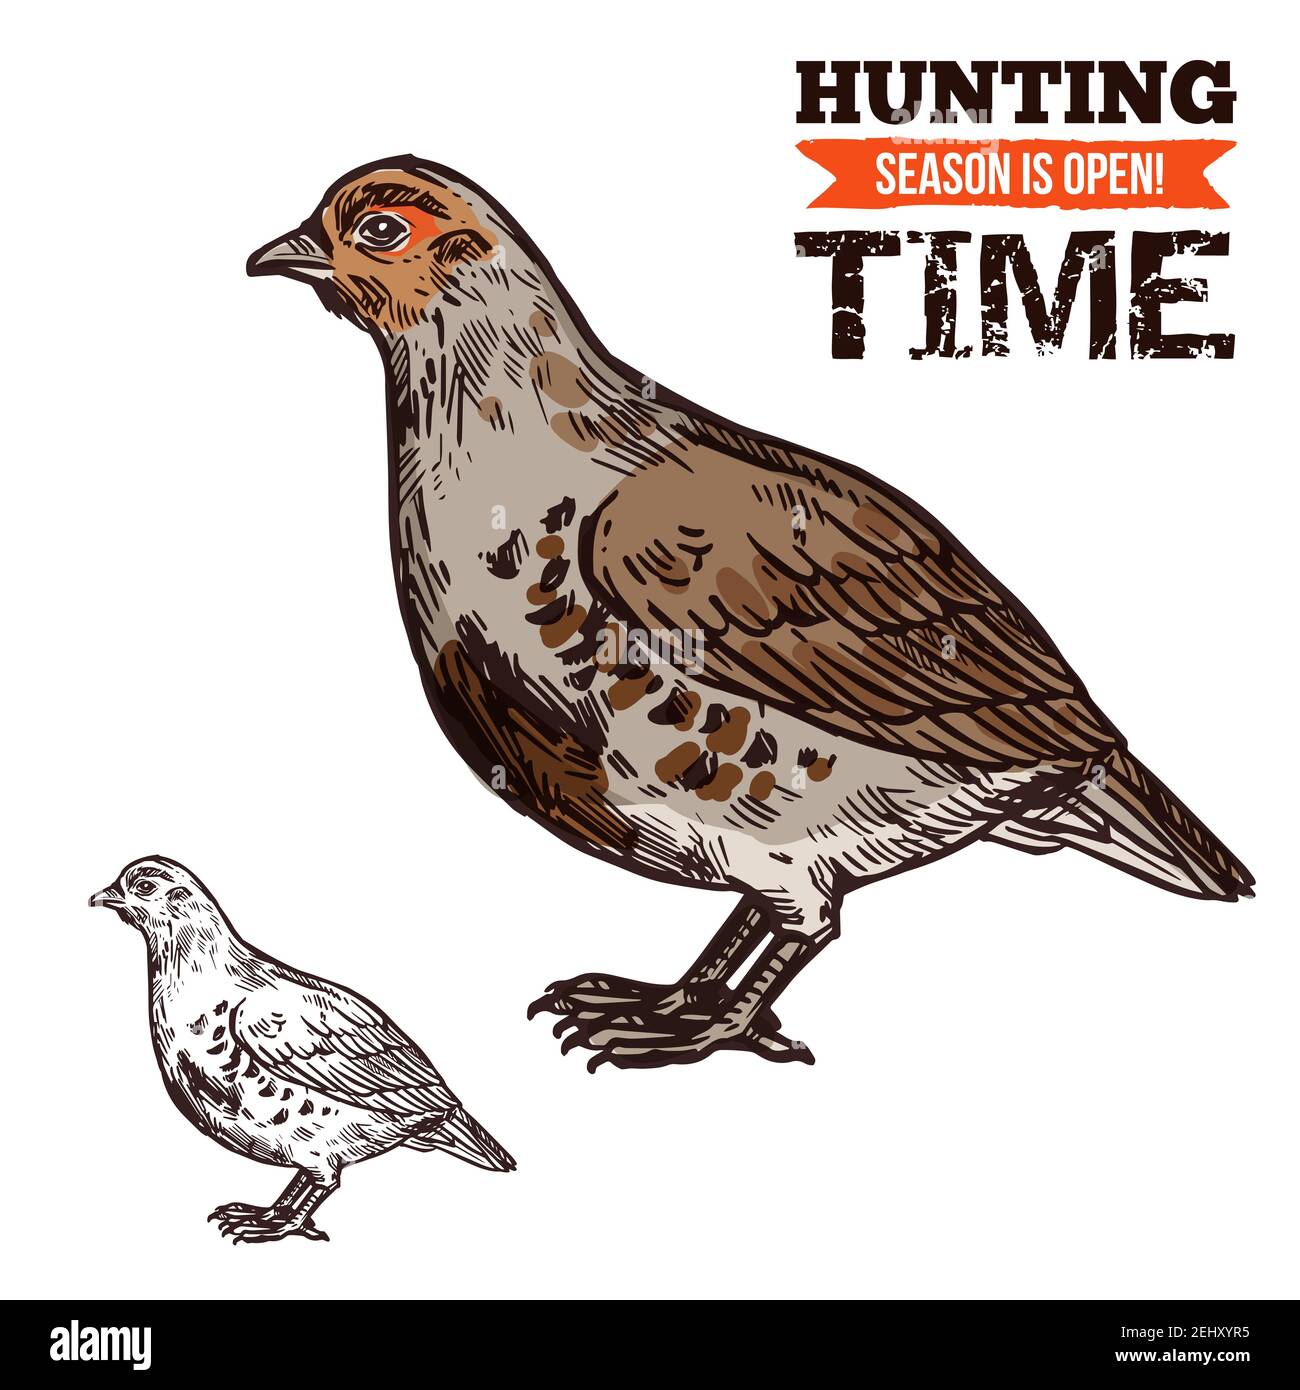 Hunting season, wild grouse in brown plumage. Bird or poultry prey, hunt time, hunters club. Vector fat animal with beak and wings, shooting sport or Stock Vector